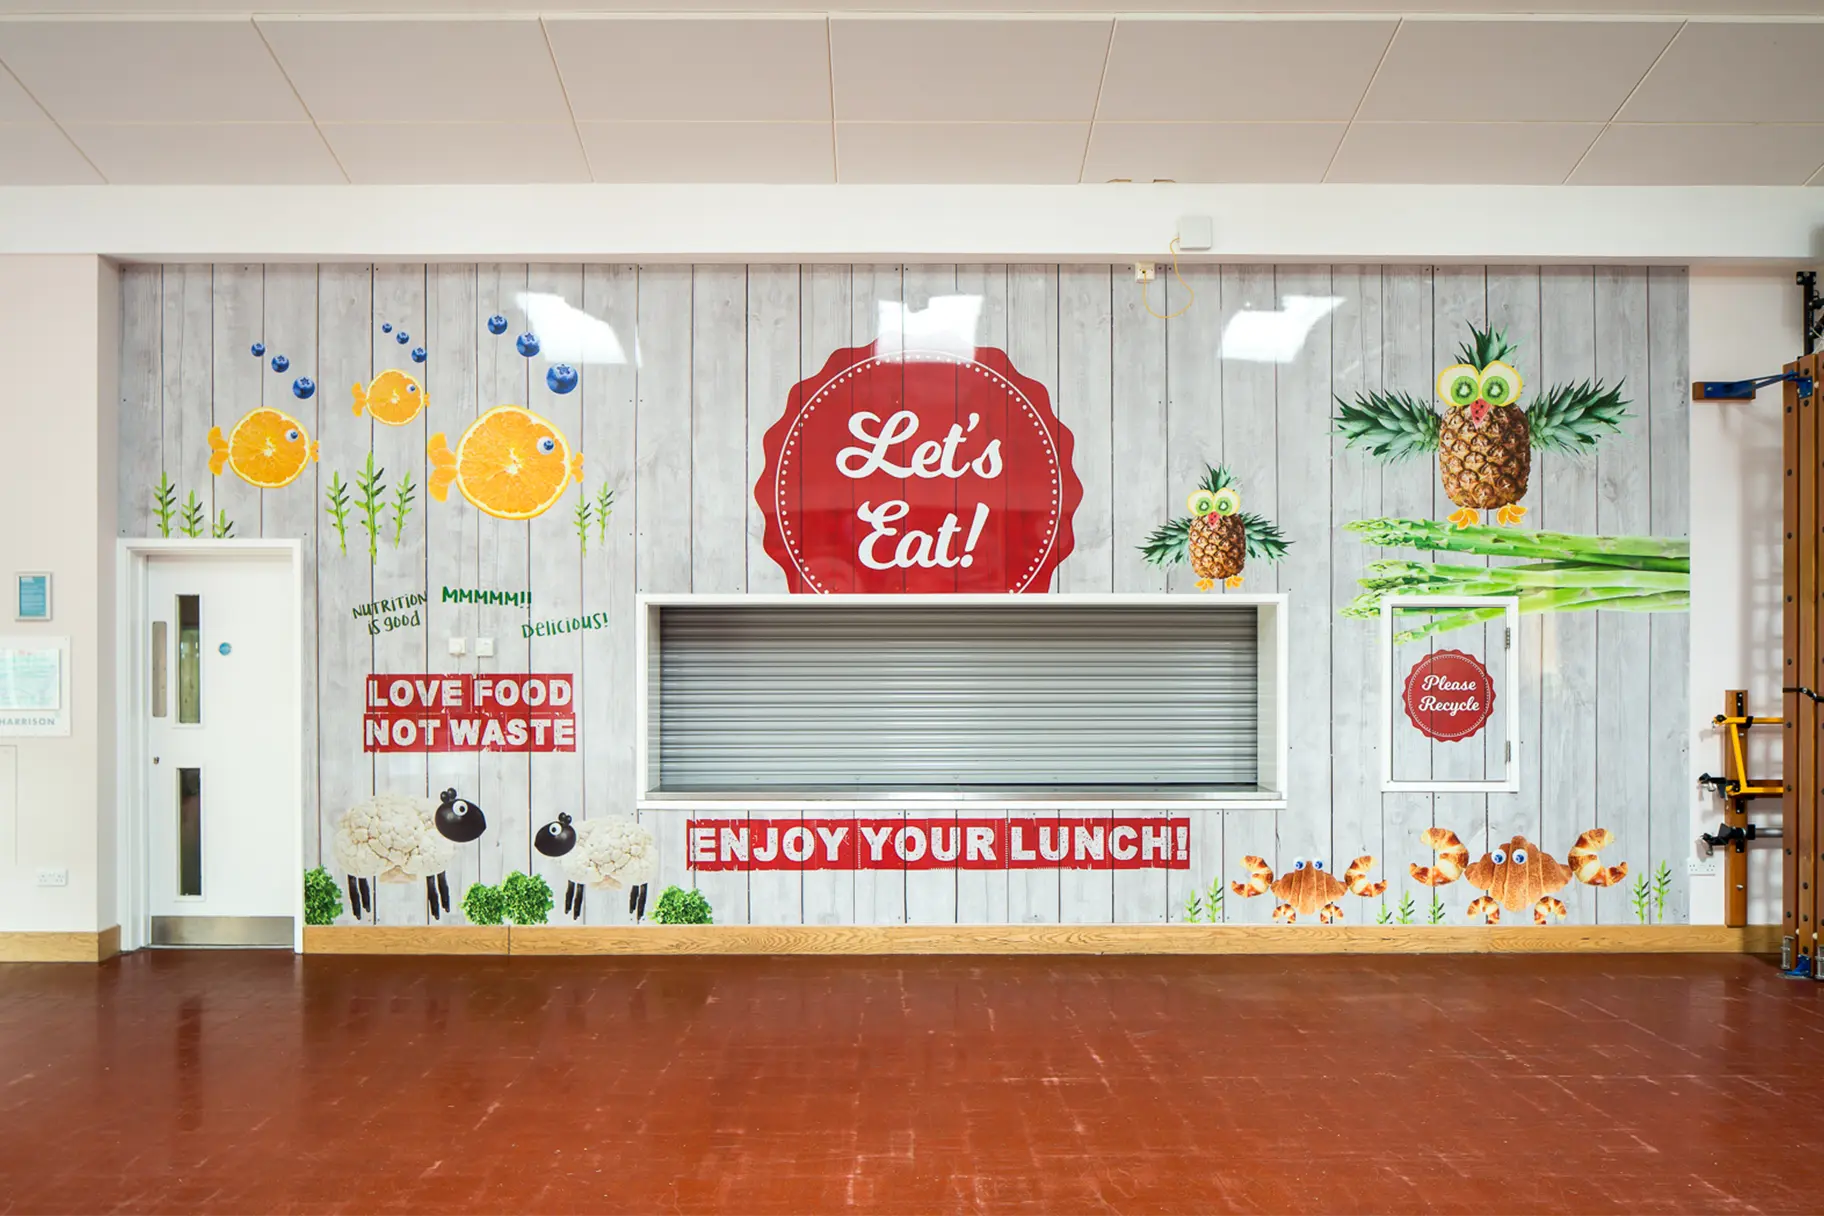 West Acton School healthy eating canteen feature wall art